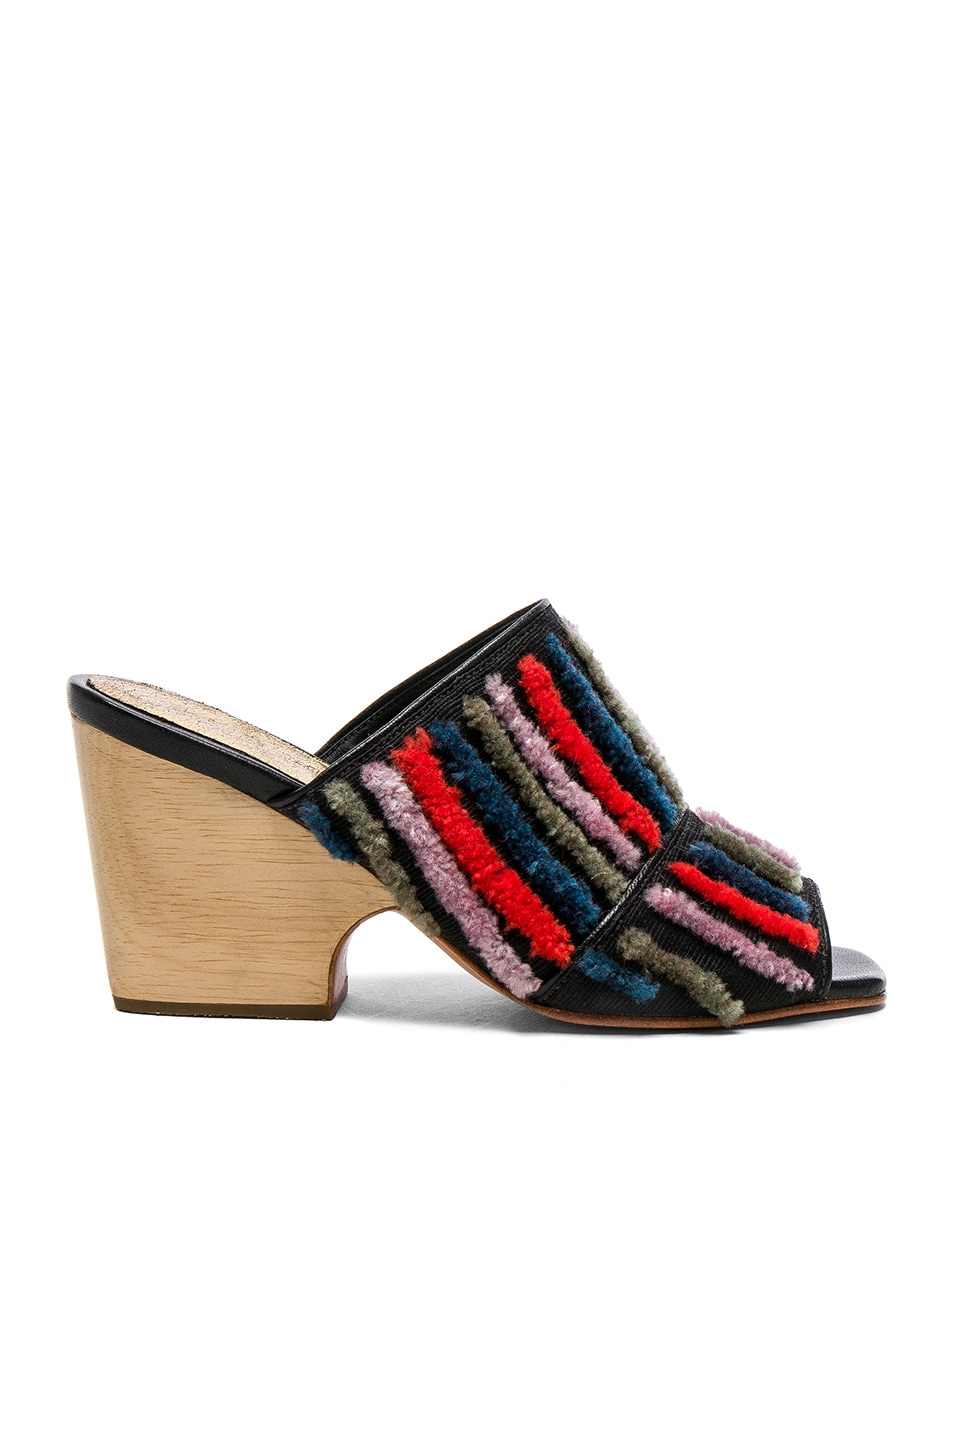 Image 1 of Rachel Comey Embroidered Dahl Sandals in Multi Stripe